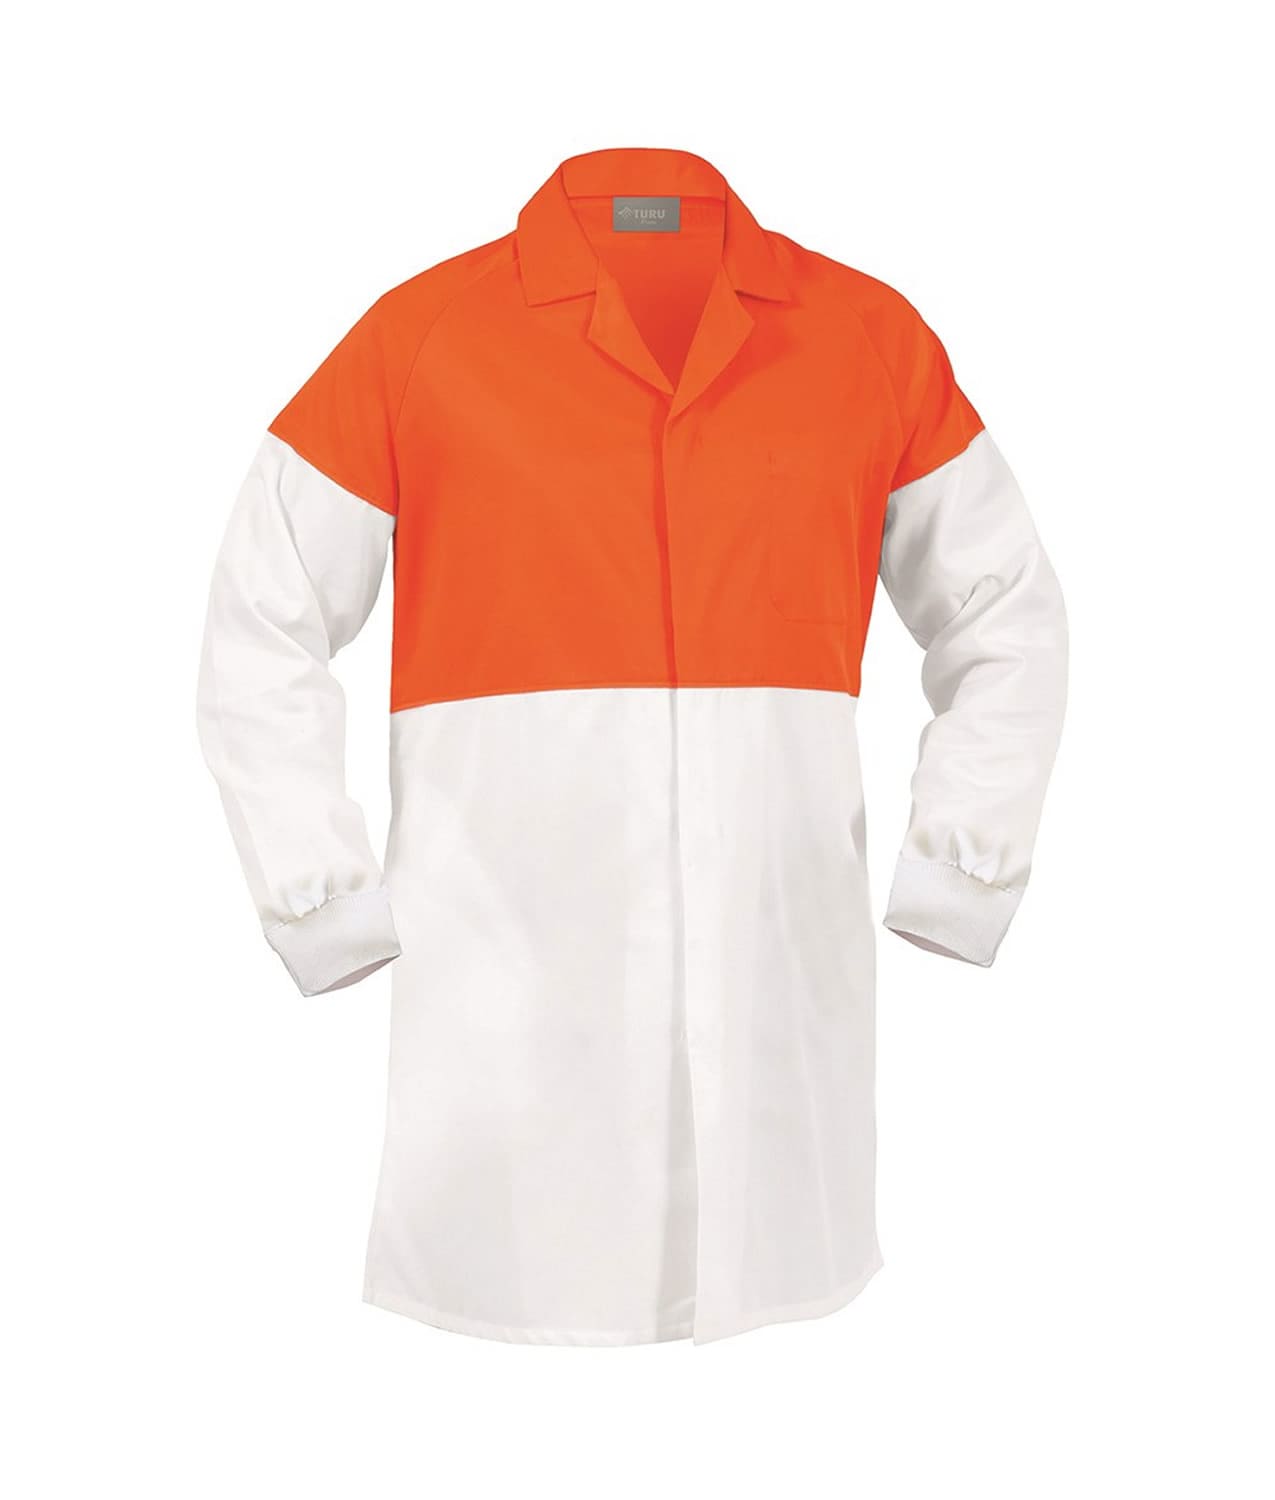 Dustcoat WORKZONE Lightweight 190Gsm Polycotton Food Industry White/Orange (DFDPCLW)